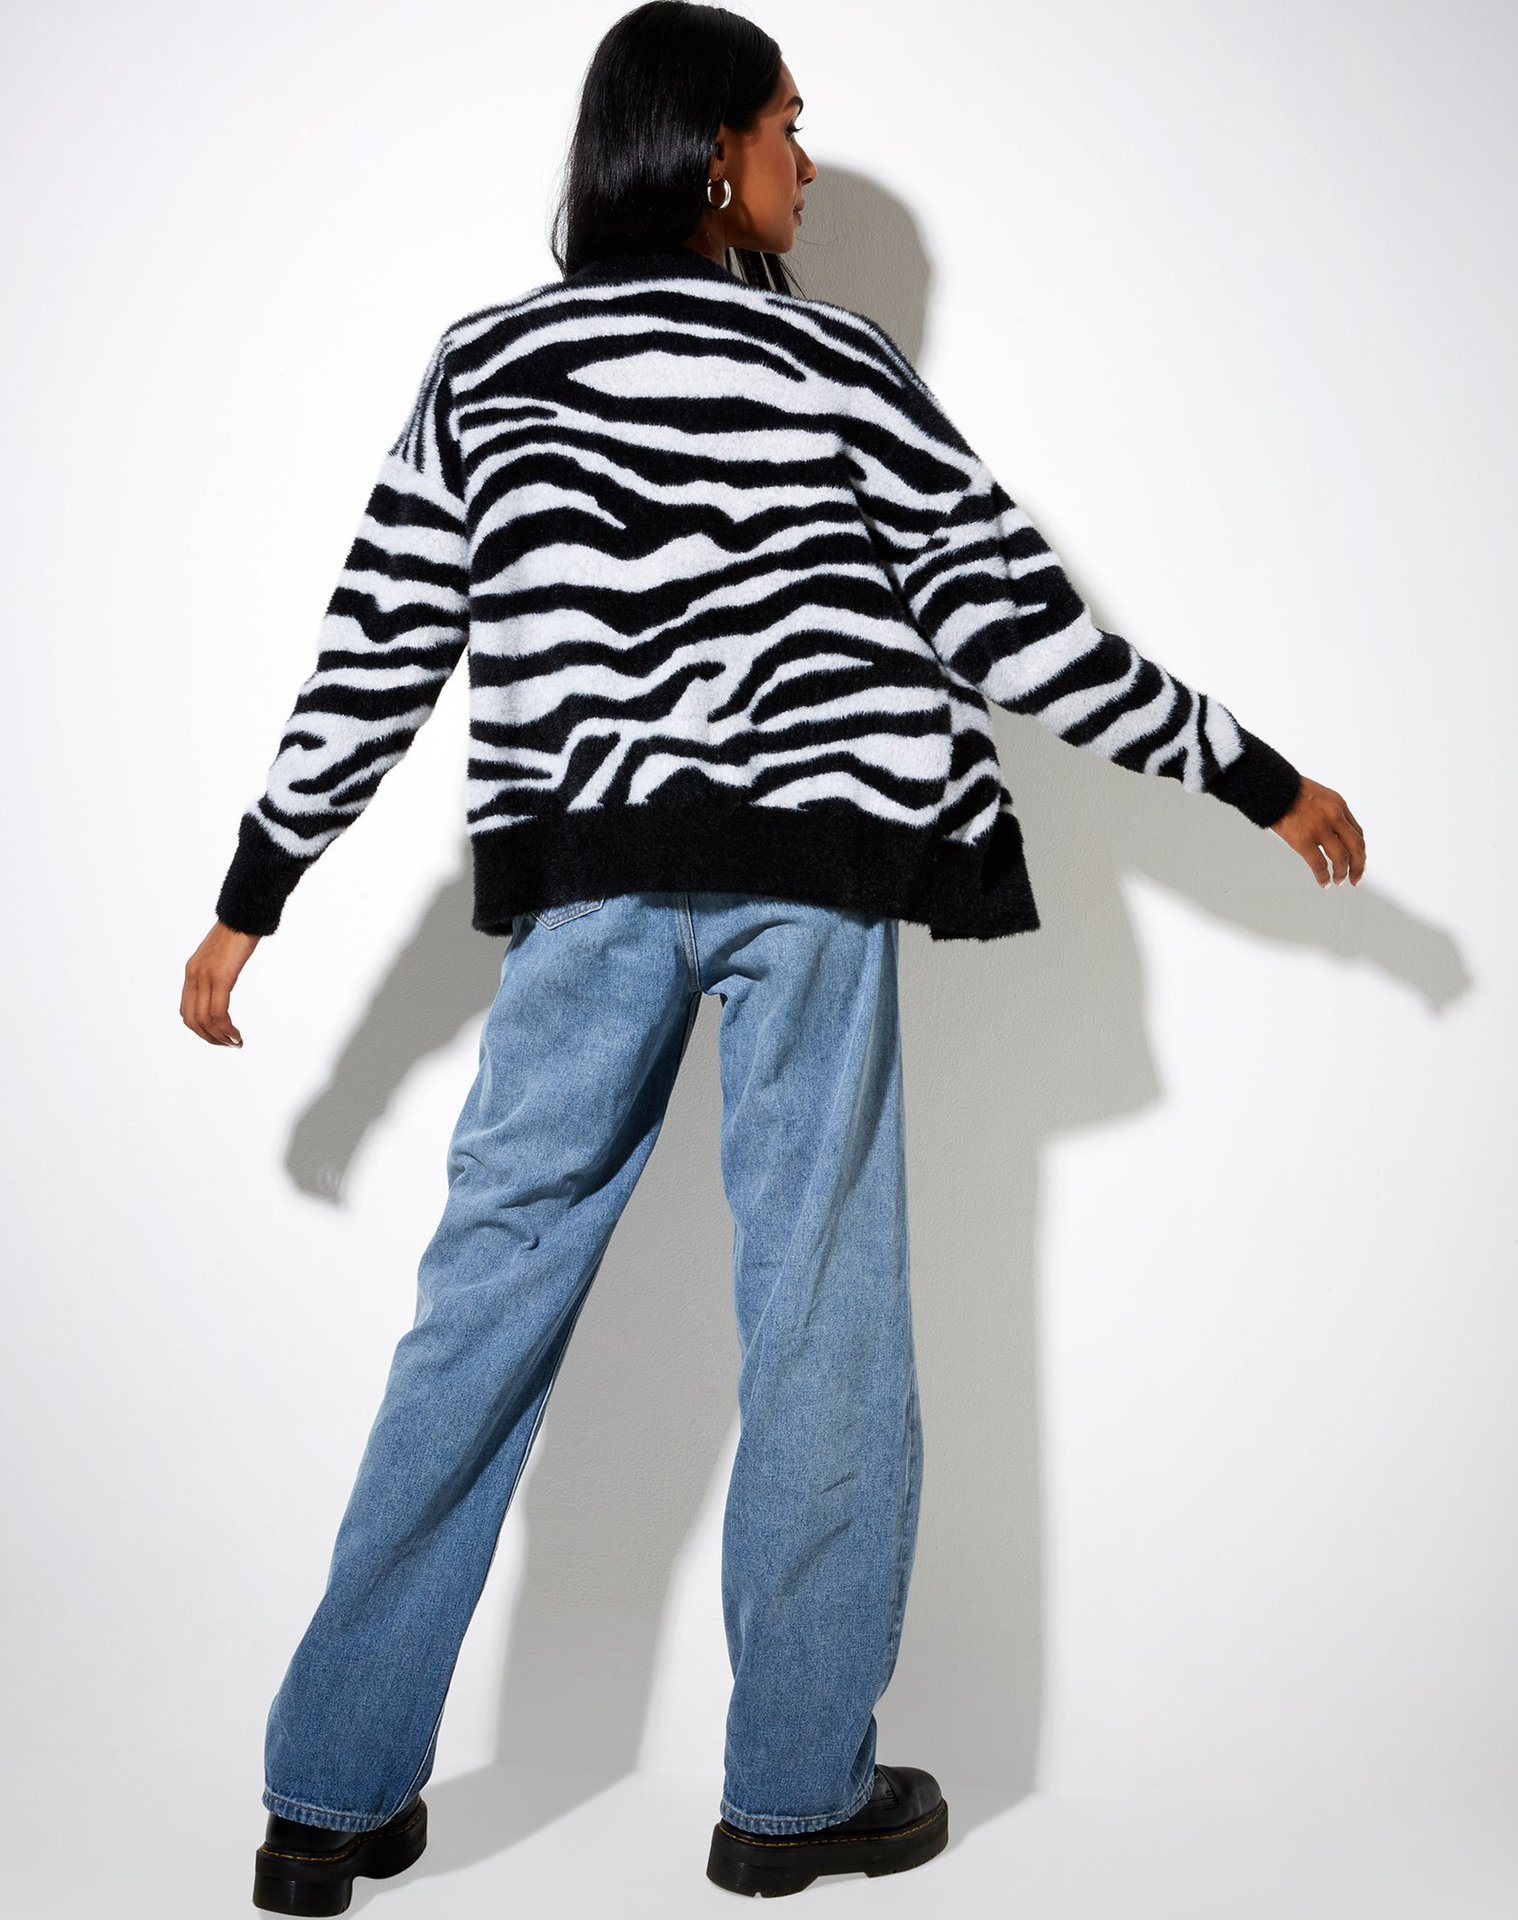 women s loose black and white striped long-sleeved cardigan nihaostyles clothing wholesale NSSX73211